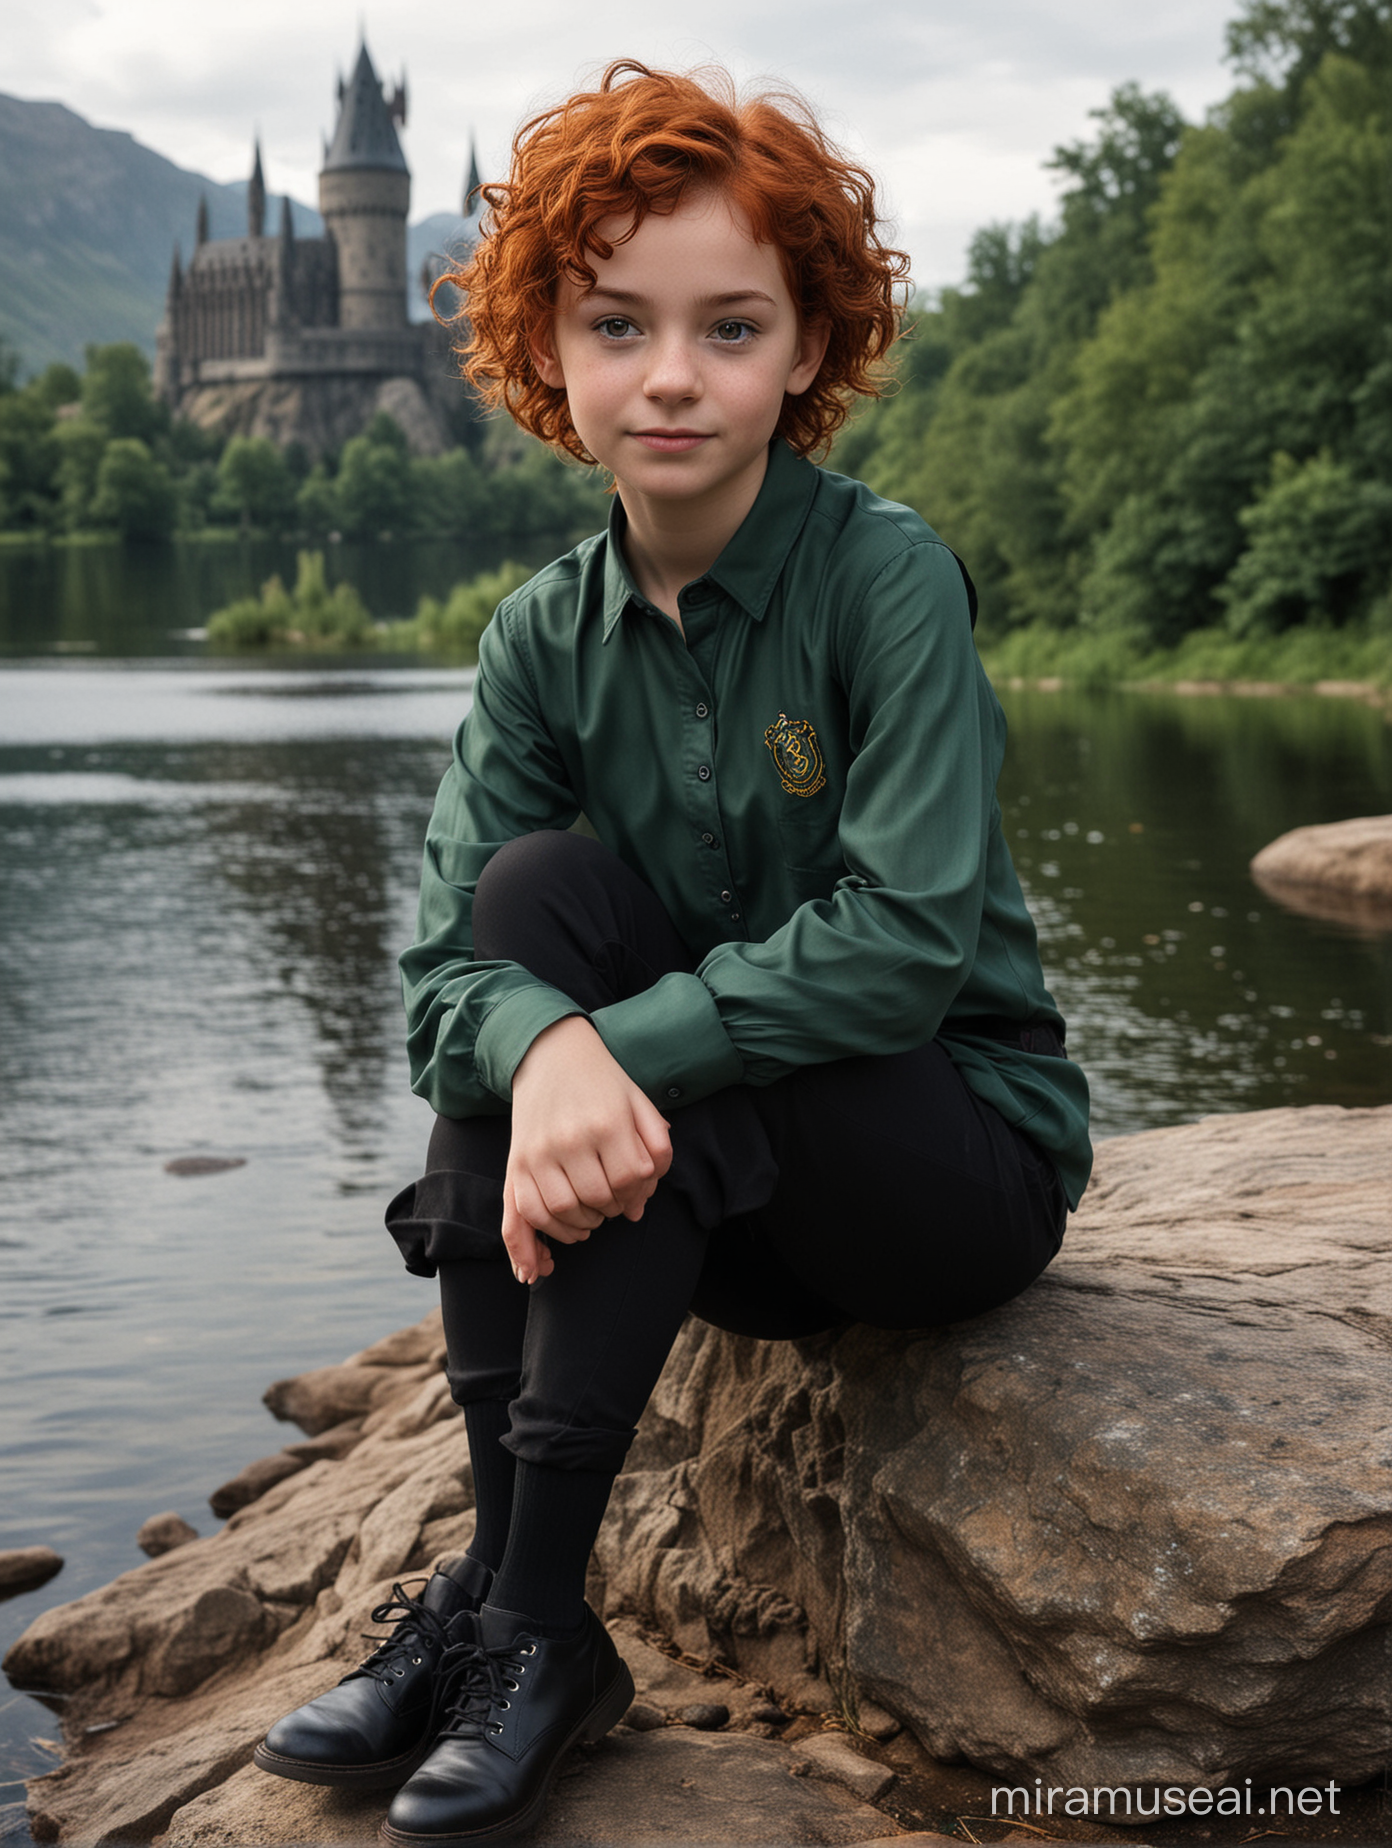 I want a picture of a very young girl (show full body) sitting on a rock, behind her is the Black lake from universe, we can see the Hogwarts castle. The girl is a young child, twelve years old. She has red curly hair, very short styled in pixie cut (almost boy-ish), they look wild. She has pale thin sharp face, with light freckles and silver-gray eyes. Her clothes are elegant, dark green silk shirt and black pants. She is a witch, Hogwarts student and she is in Slytherin. She's twelve years old child and she is not smiling. Her face is thin and sharp. Her hair is really short, messy pixie cut.